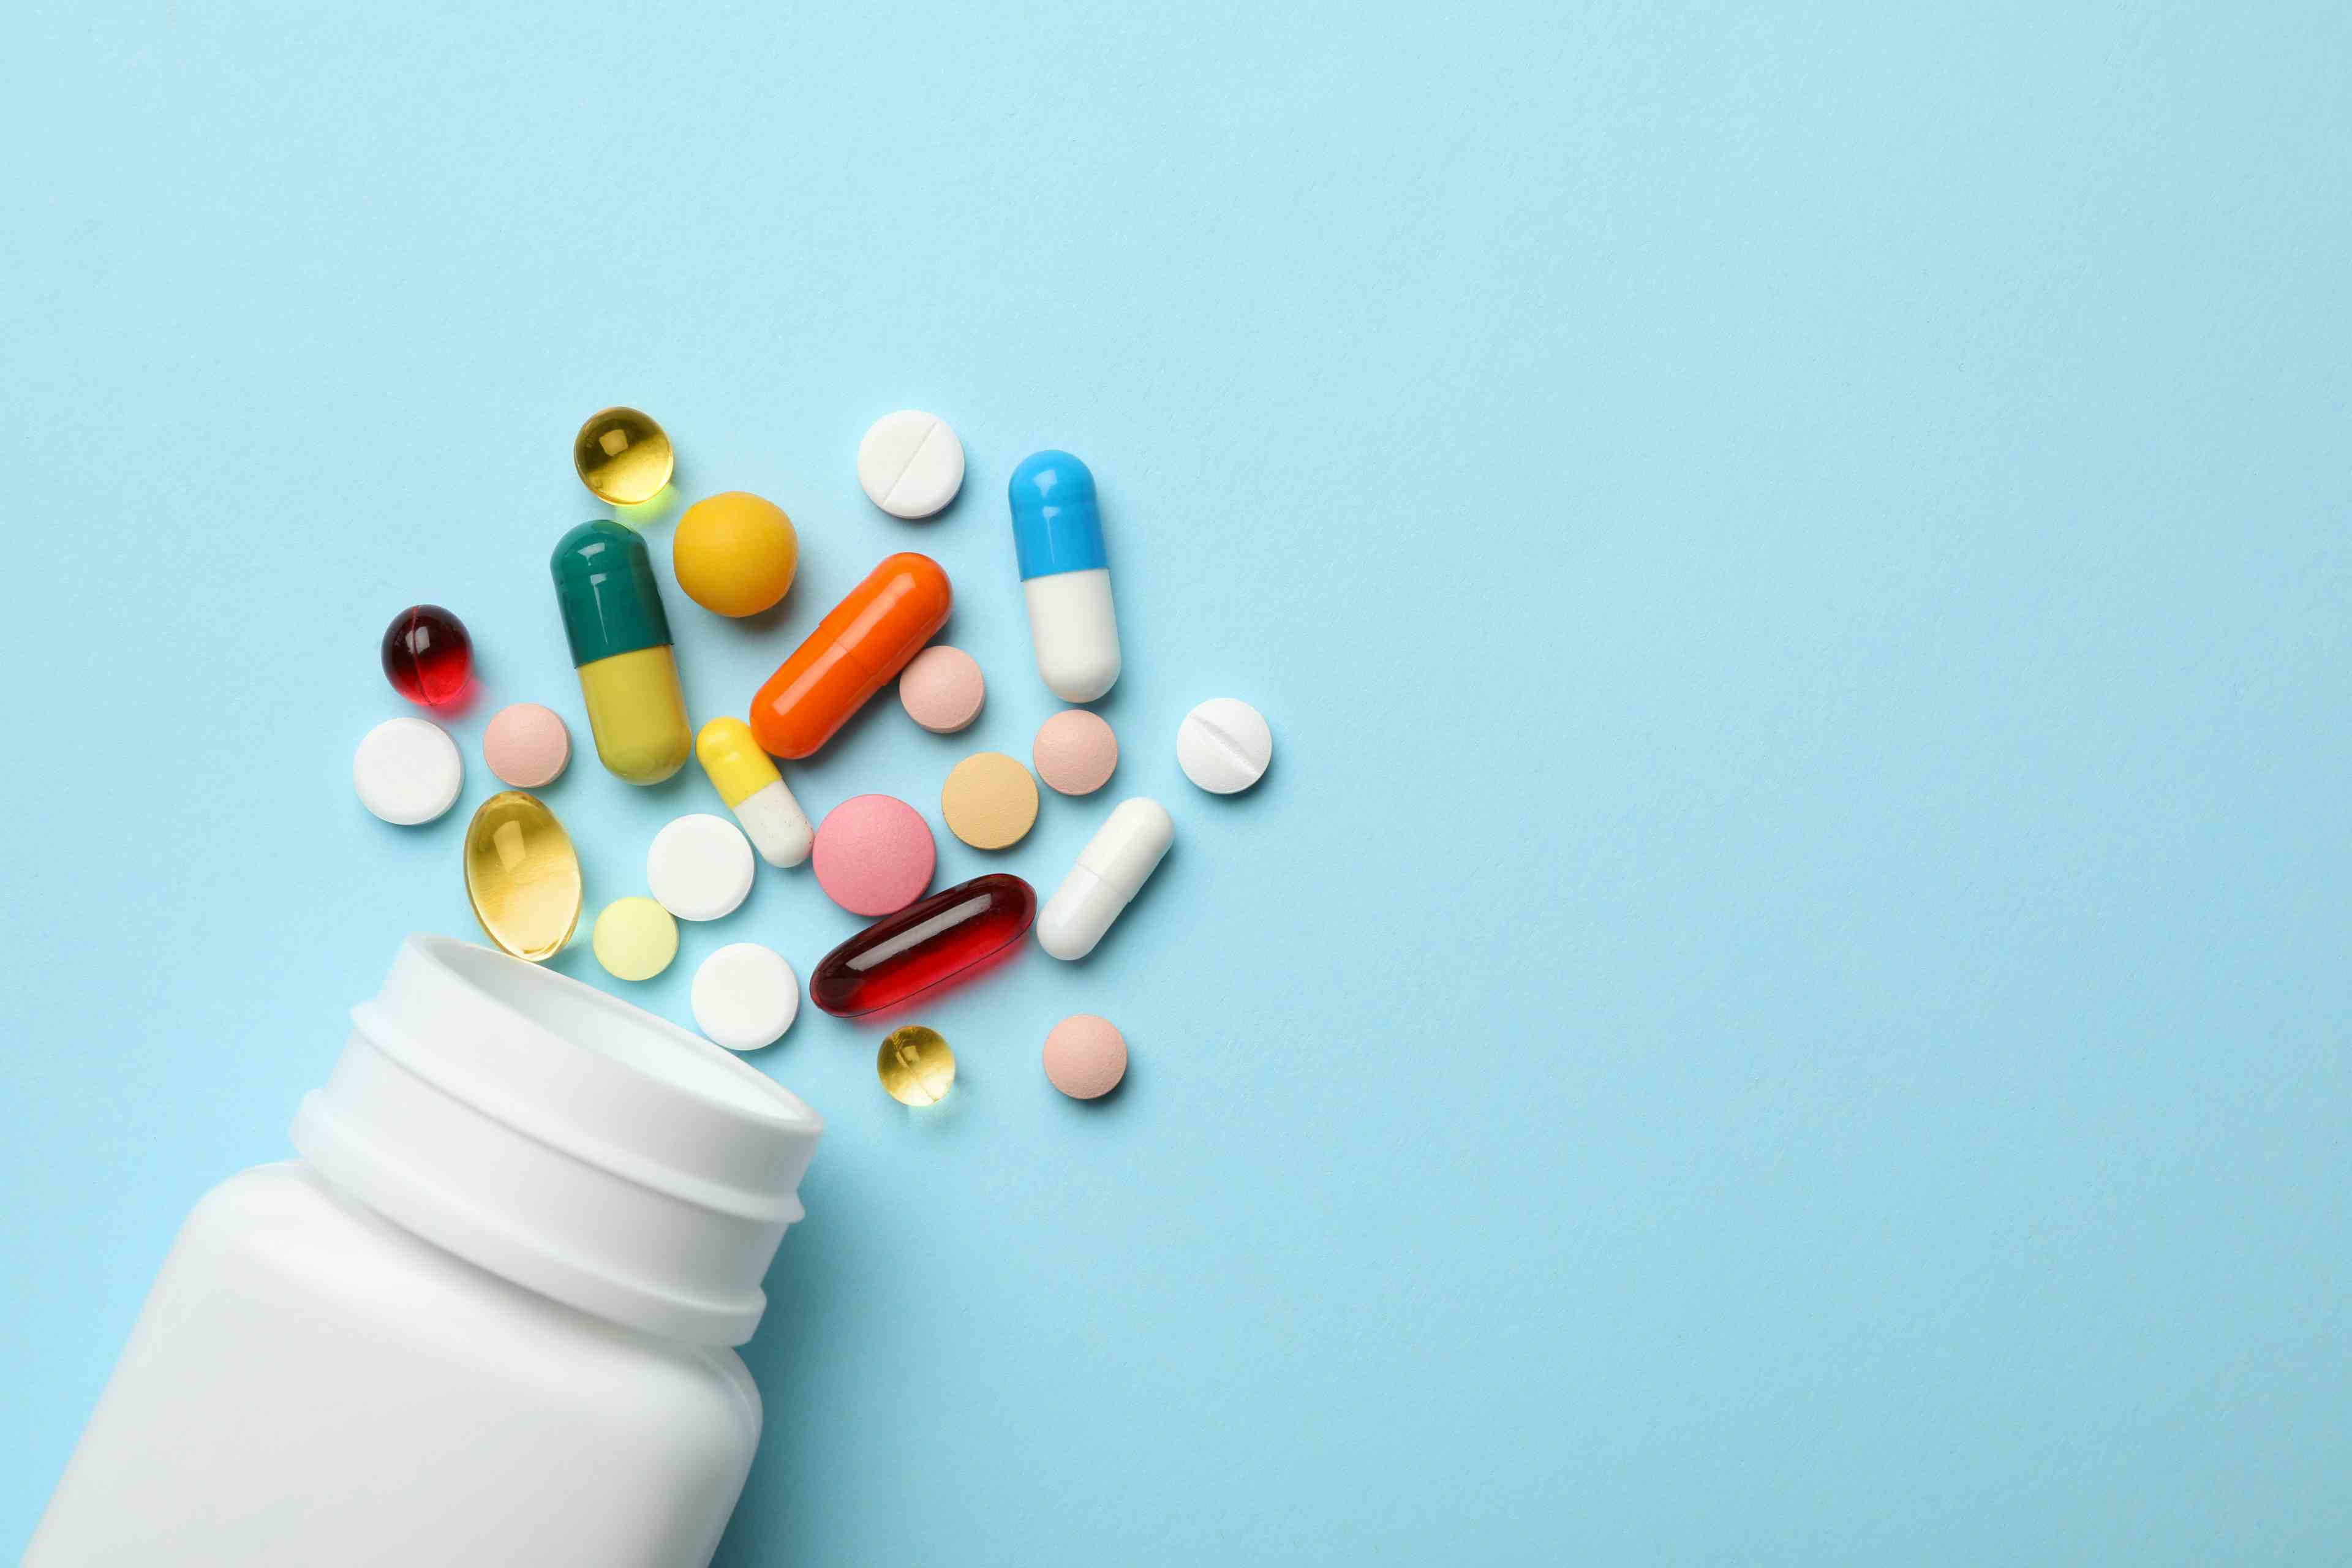 Bottle and scattered pills on color background, top view | Image Credit: New Africa - stock.adobe.com